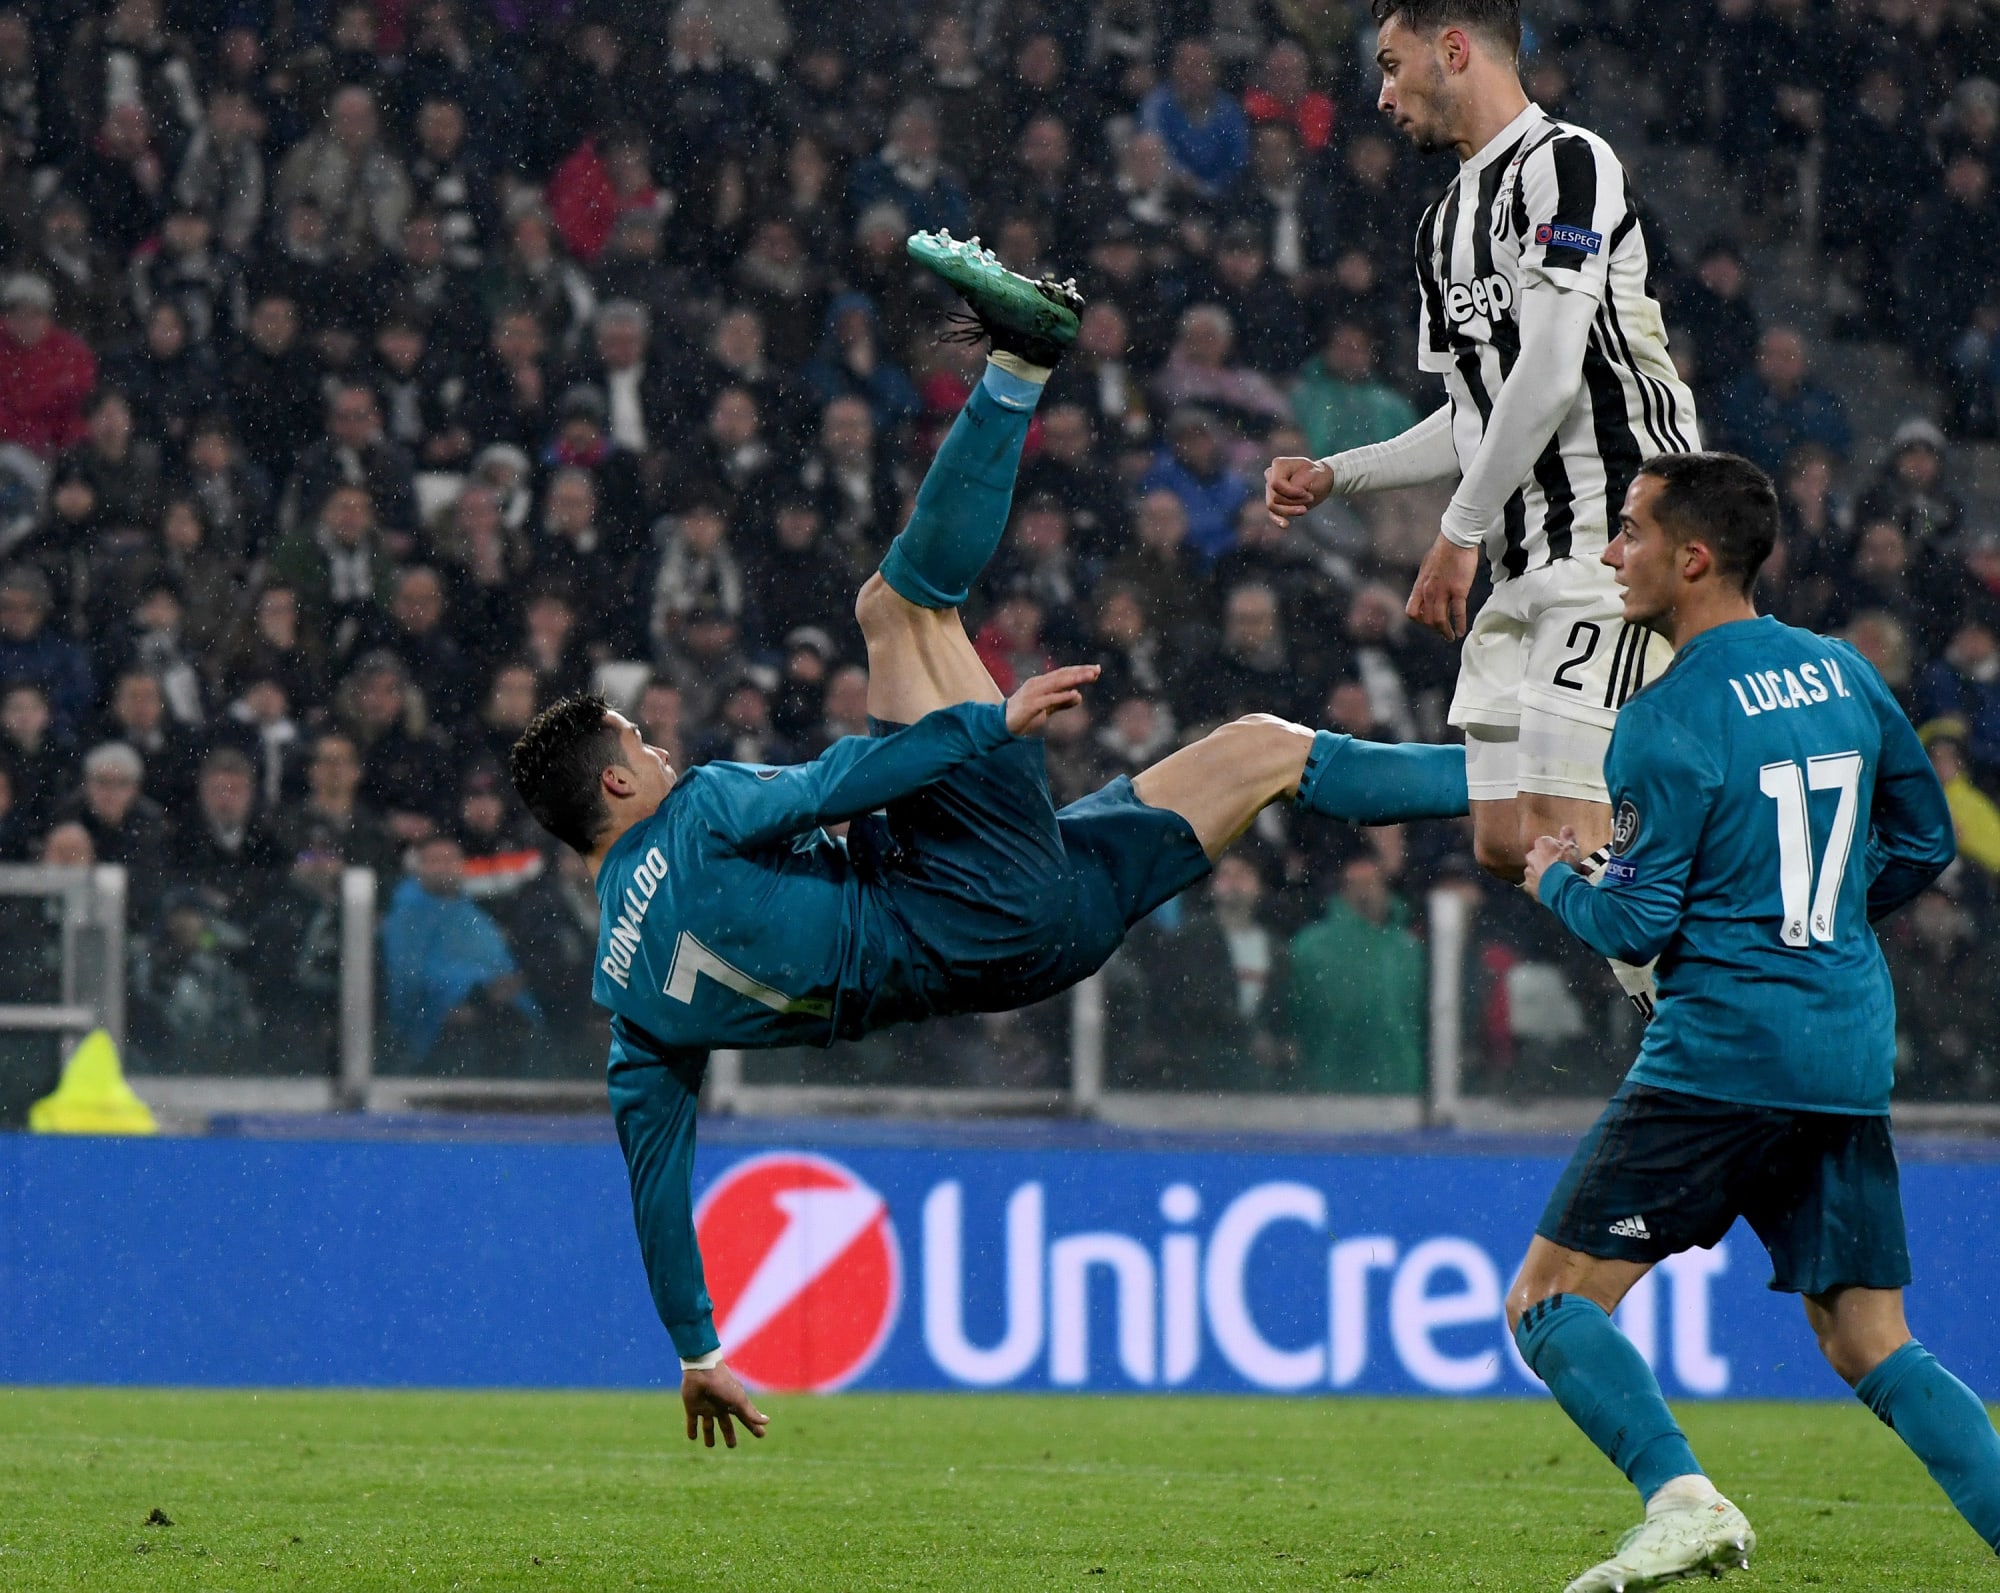 Juventus 0 Real Madrid 3 Quick recap of the dominating UCL win